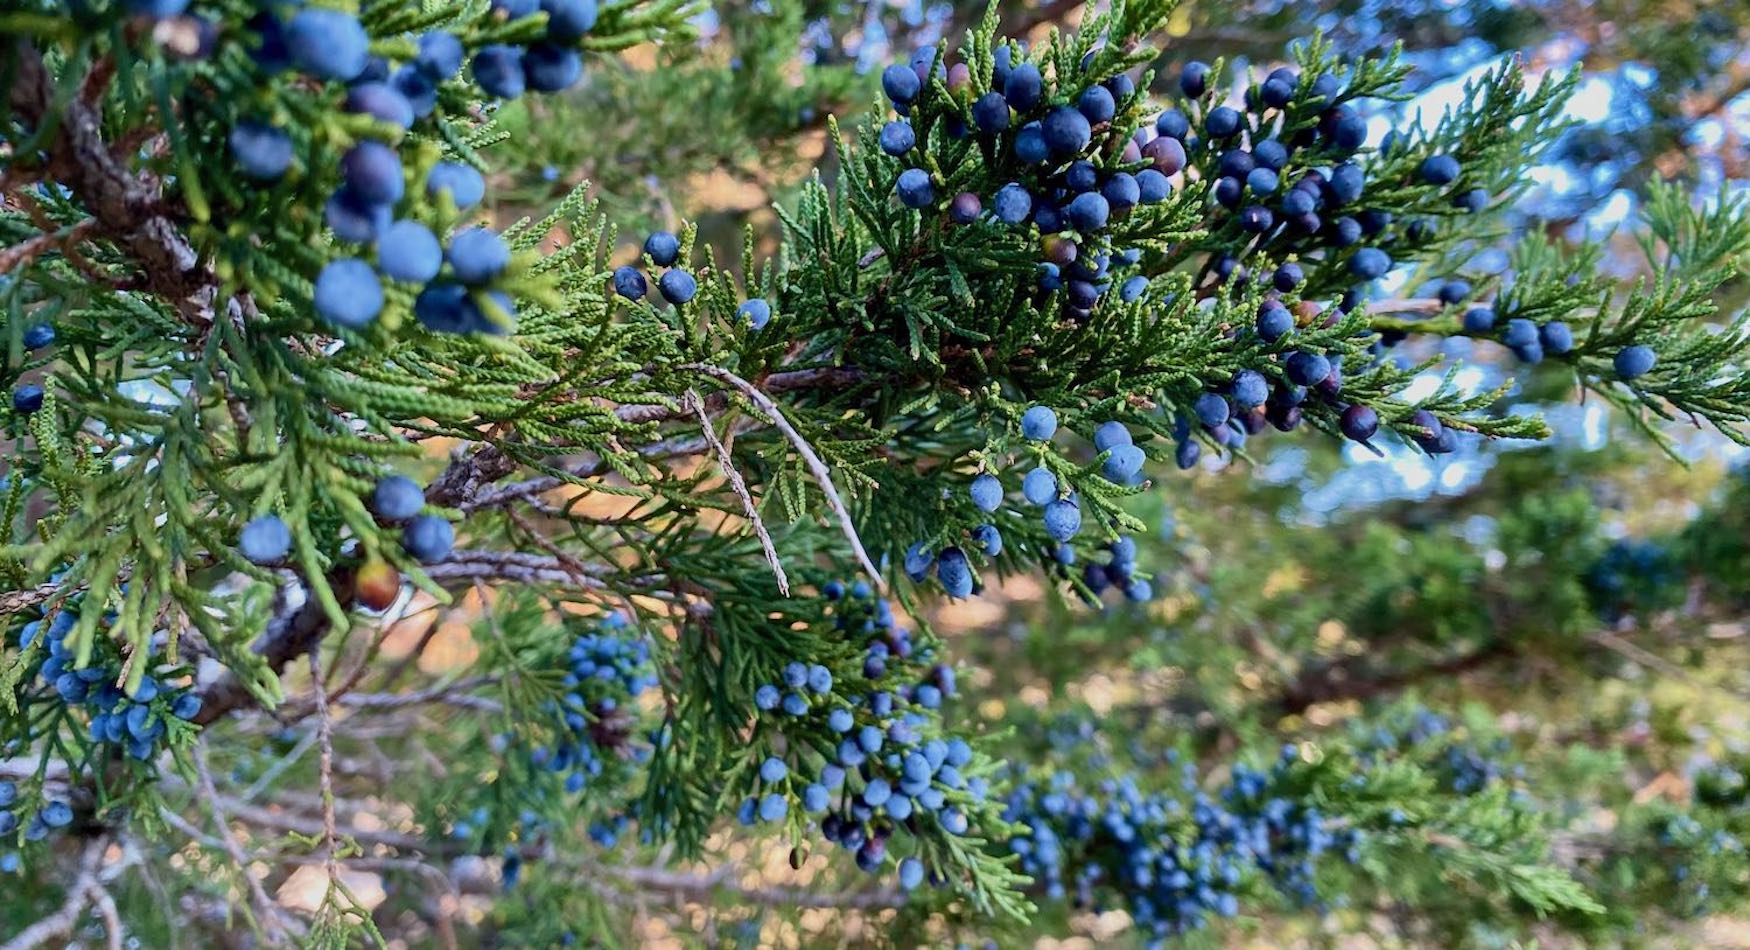 2023 Holiday Wishes, Blue Berries on a Juniper Branch